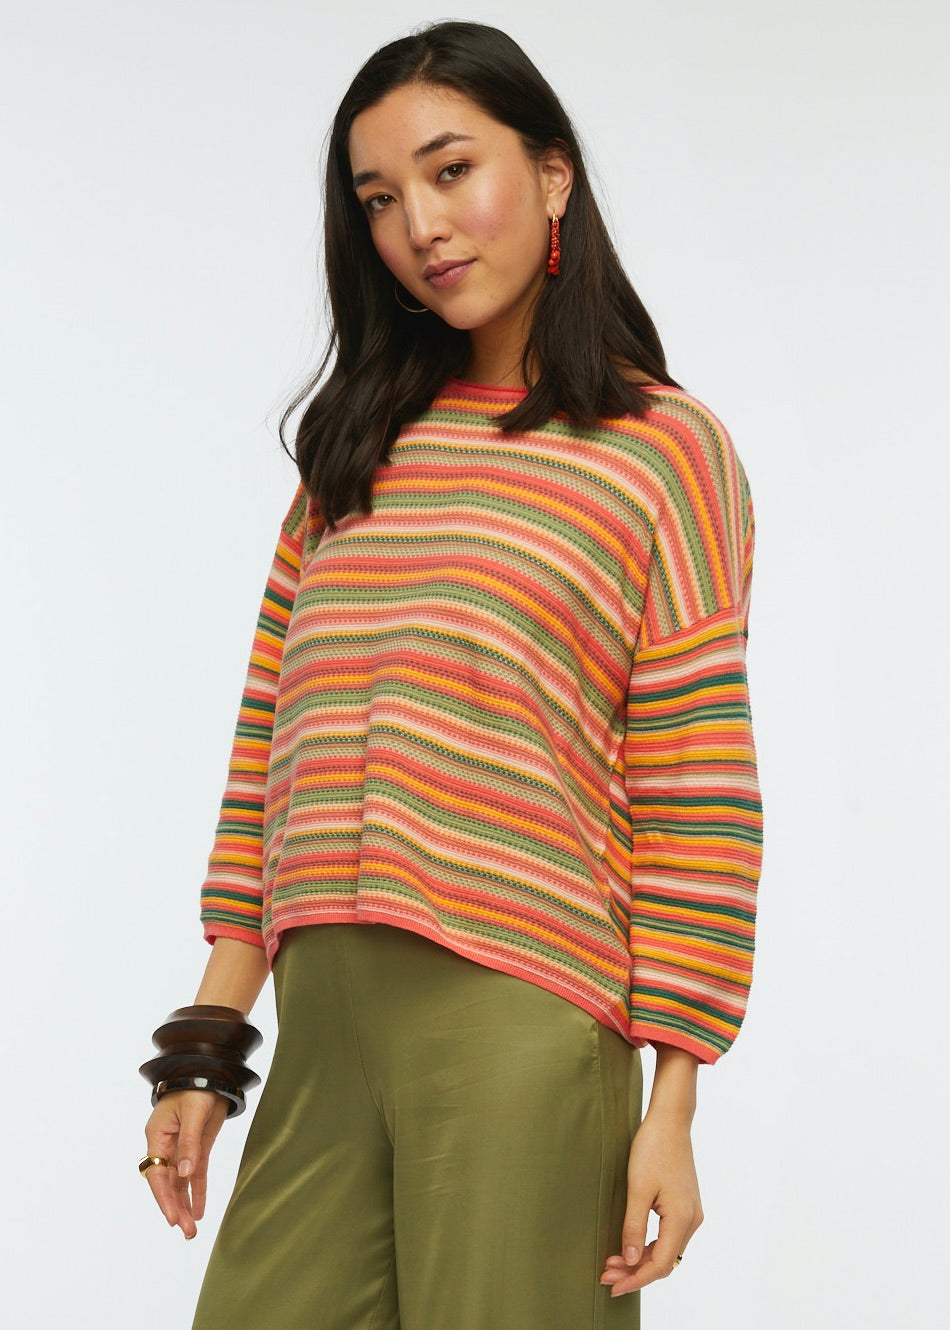 Zaket & Plover Zaket & Plover - Jacquard Top - Florence available at The Good Life Boutique